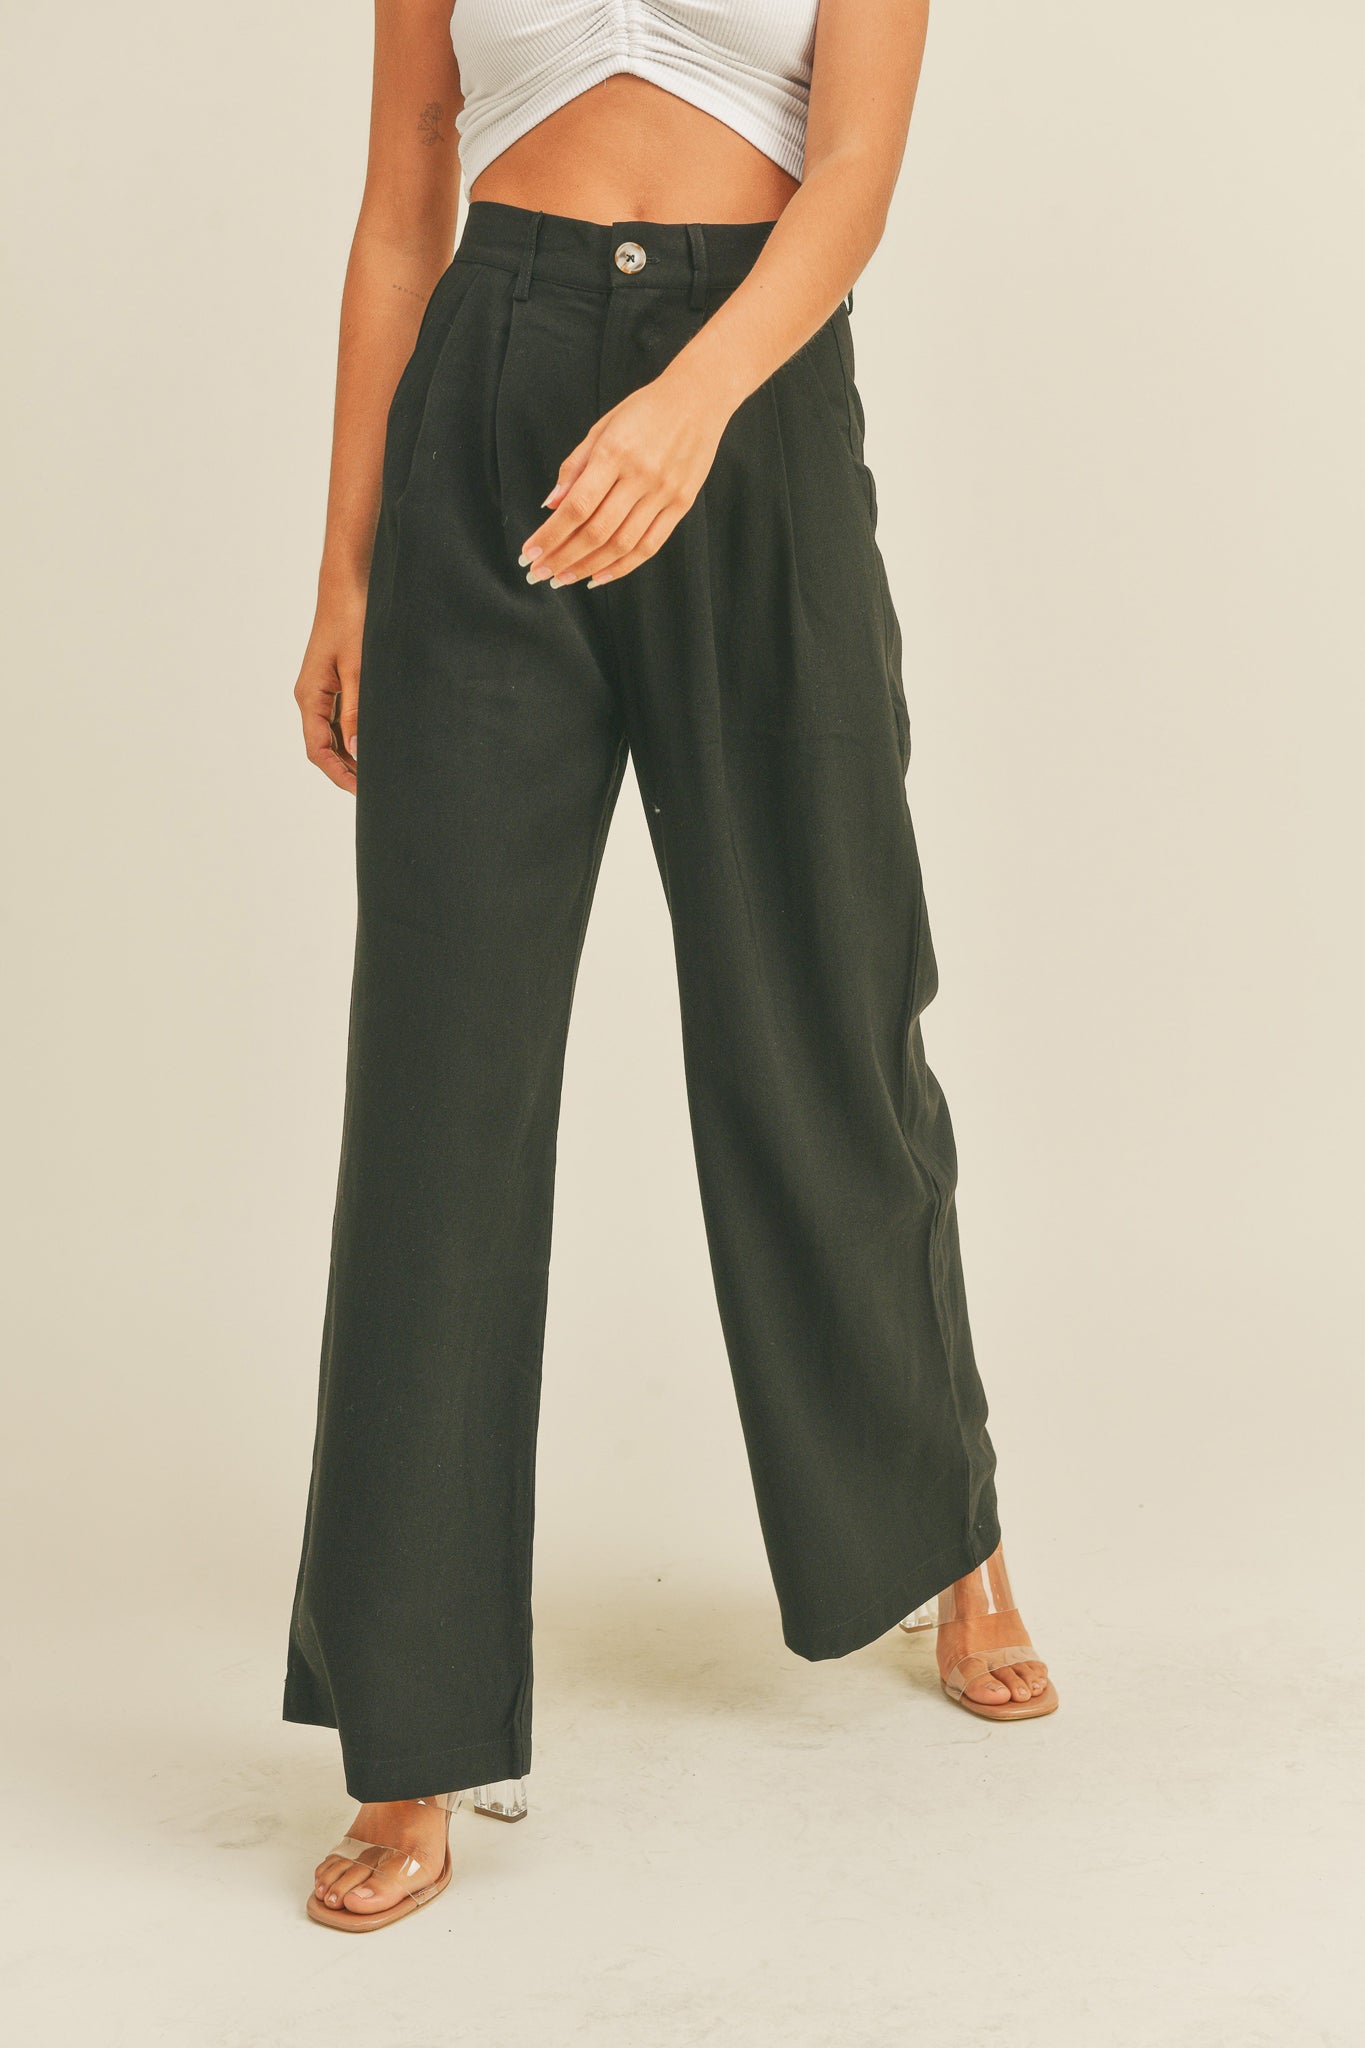 View 1 of Arid Trousers in Black, a Pants from Larrea Cove. Detail: Introducing our Arid Trousers - the perfect pant...